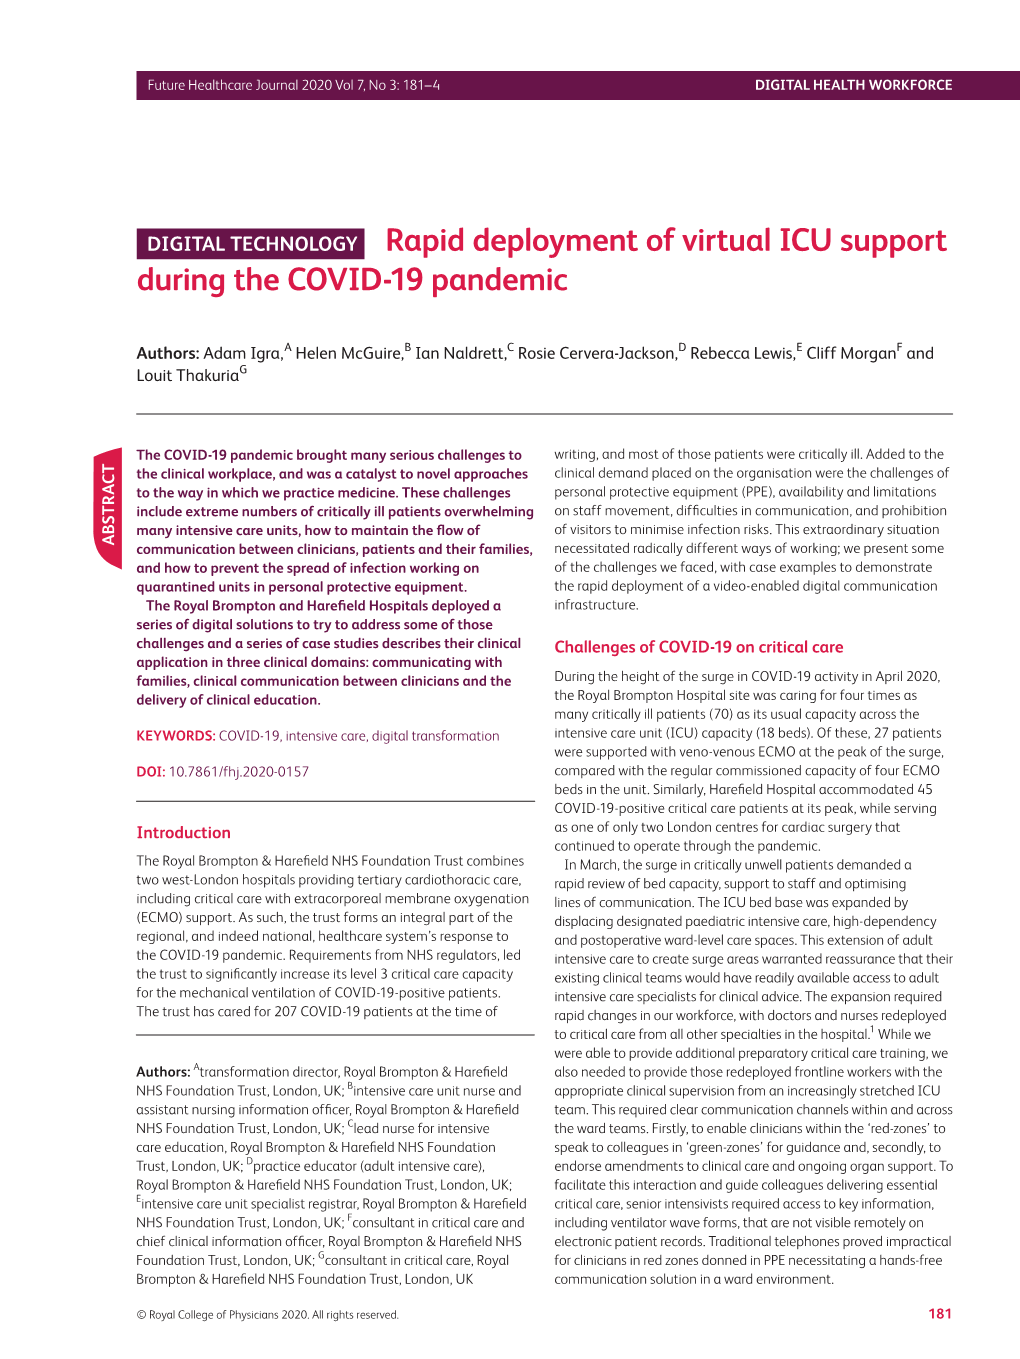 Rapid Deployment of Virtual ICU Support During the COVID-19 Pandemic